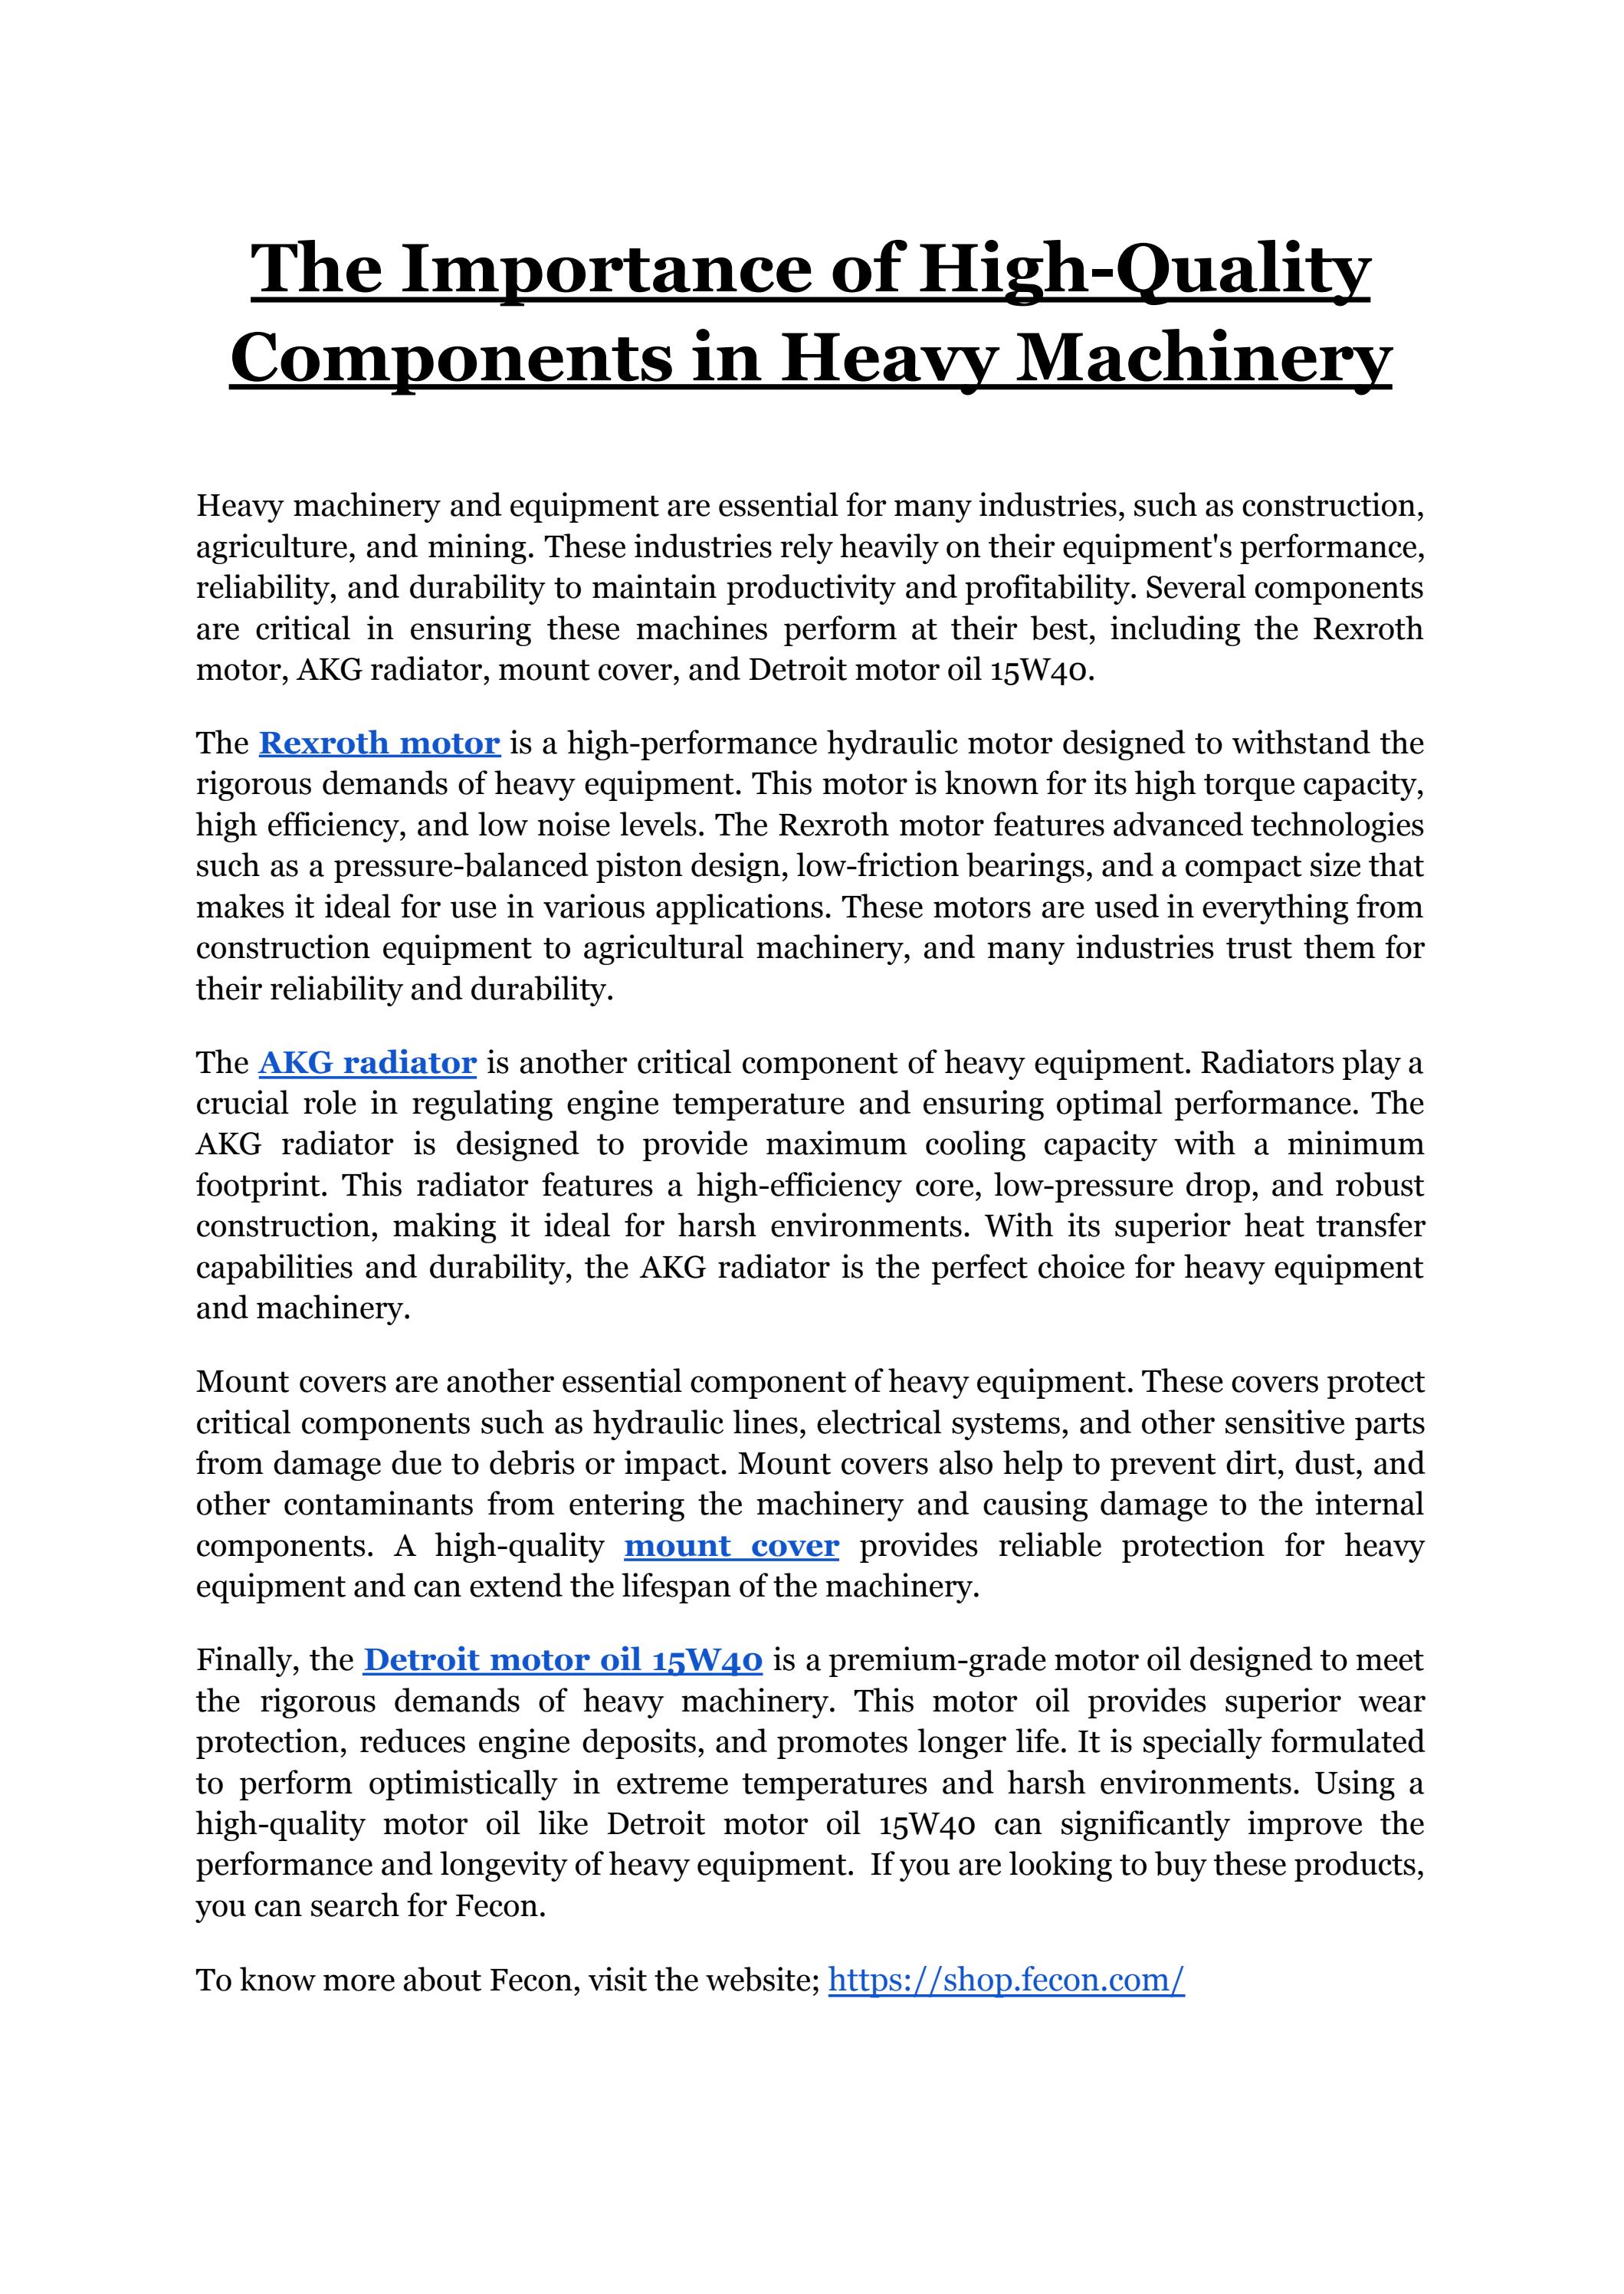 The Importance of High-Quality Components in Heavy Machinery